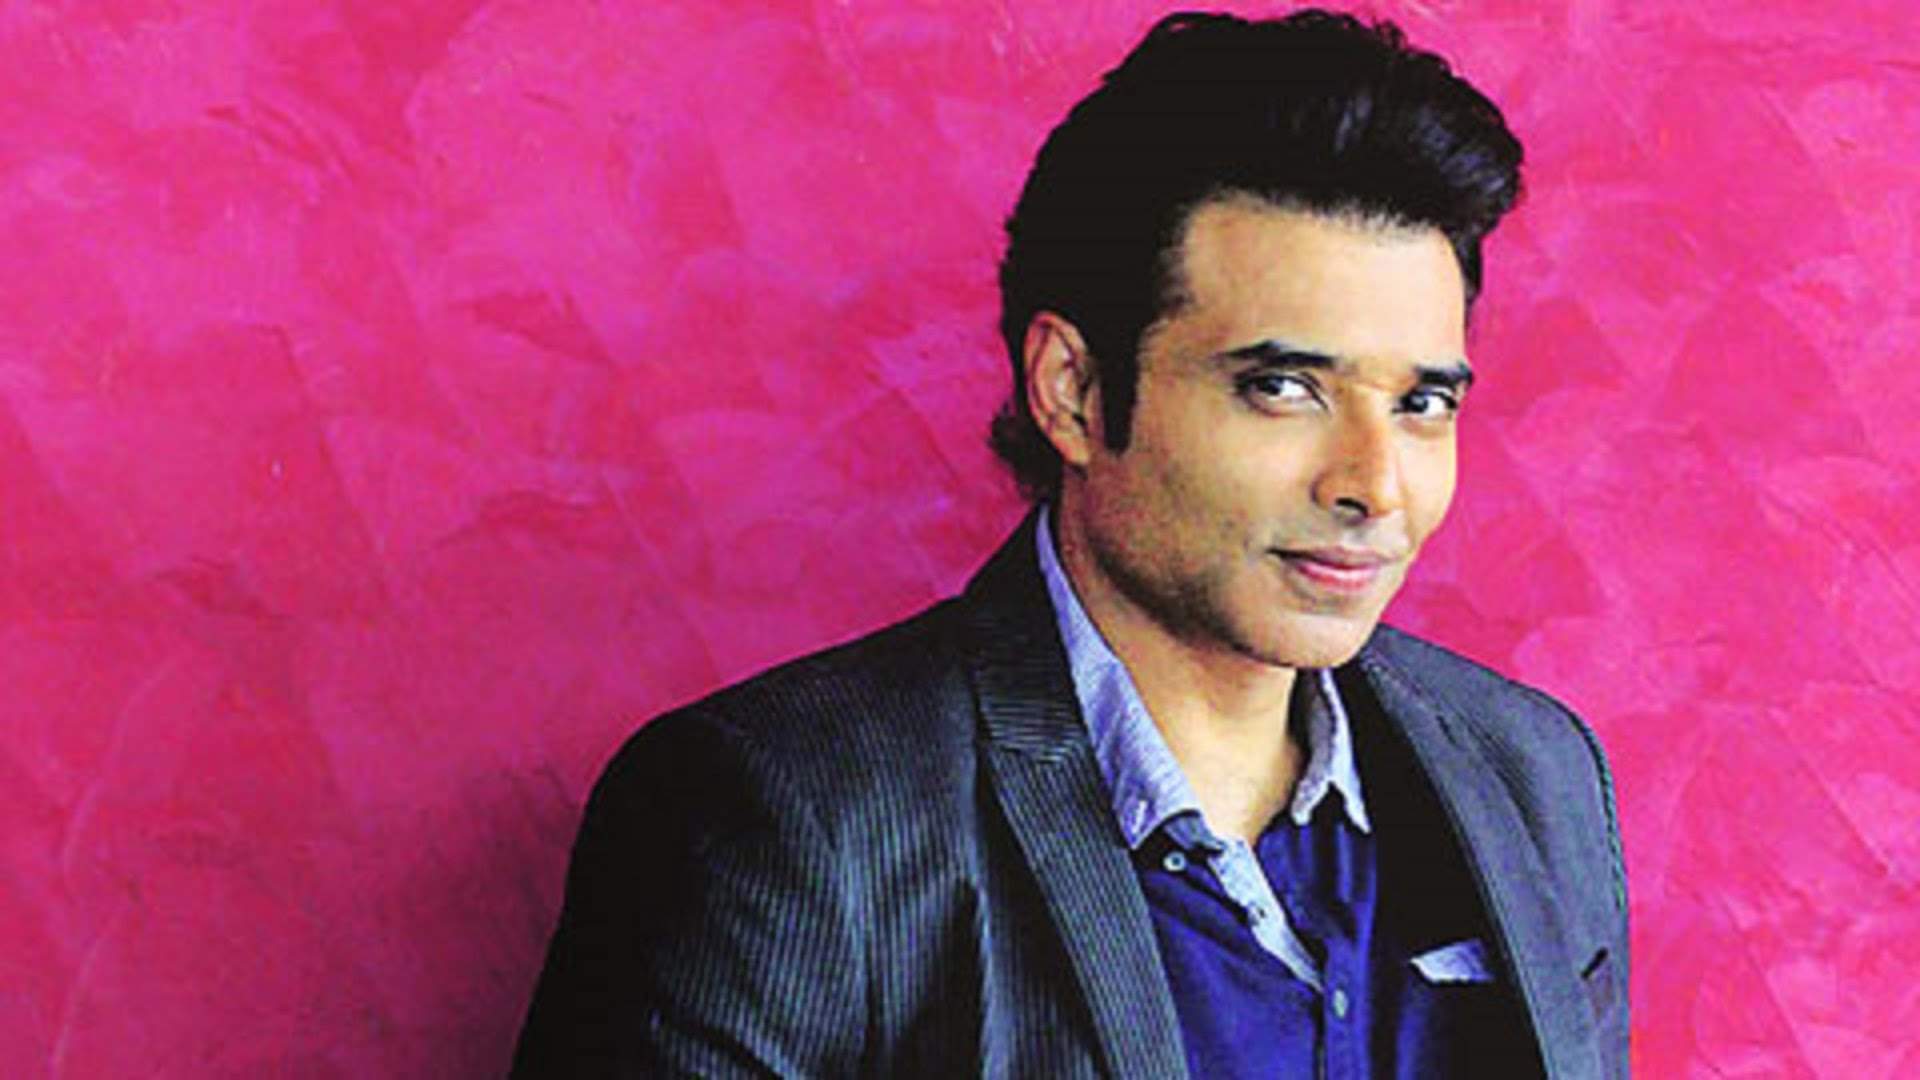 Is actor Uday Chopra depressed? What's making him tweet such cryptic messages?